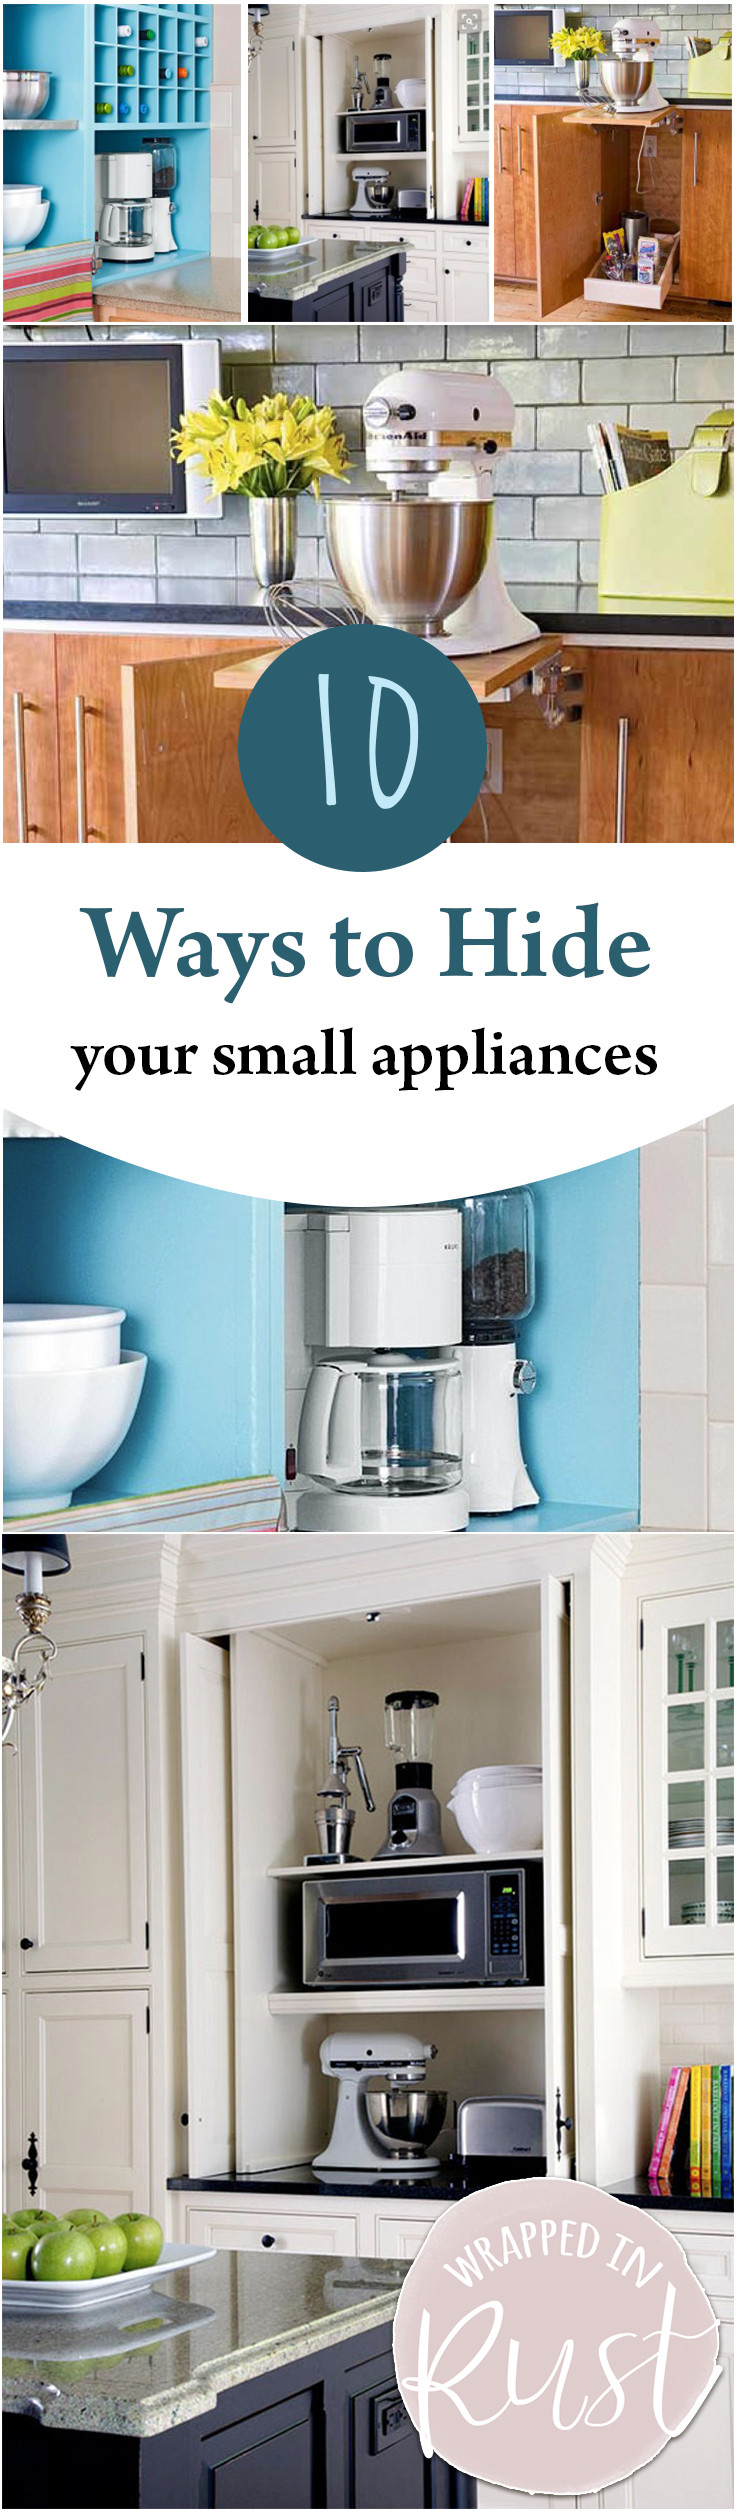 Small Kitchen Appliance Storage
 10 Ways to Hide Your Small Appliances Wrapped in Rust